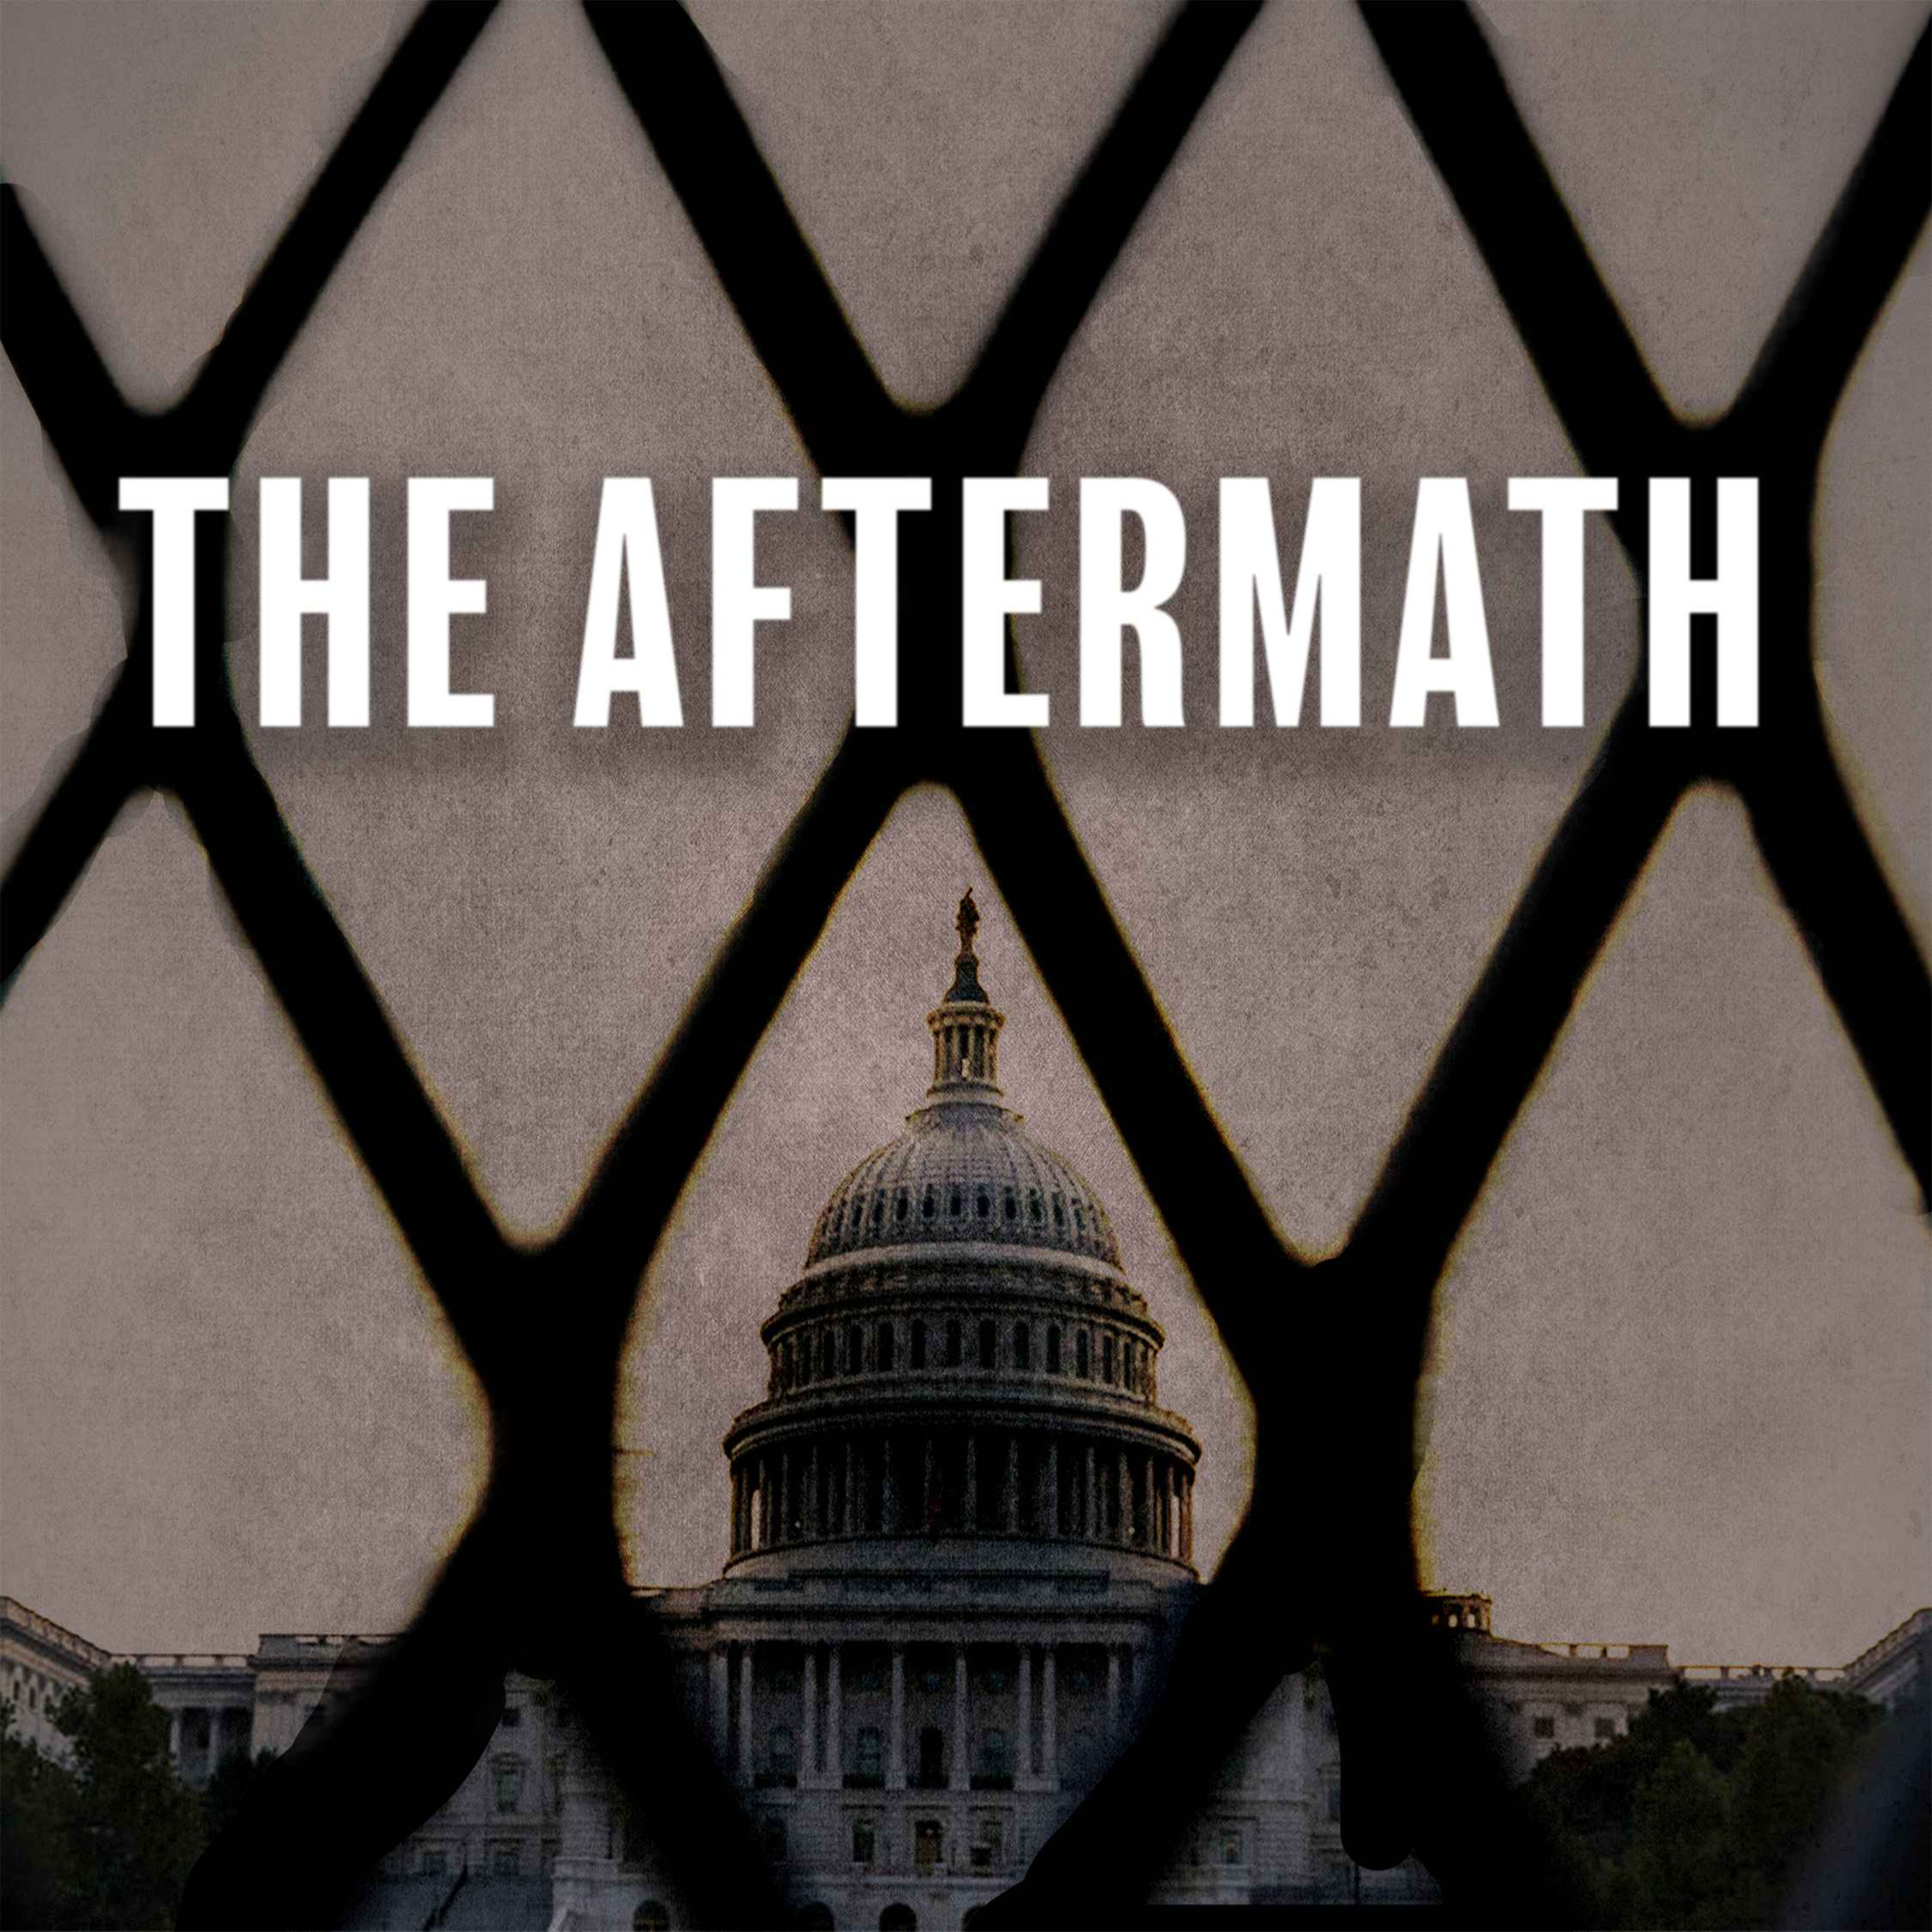 The Aftermath- Episode 4: A Bipartisan Interlude